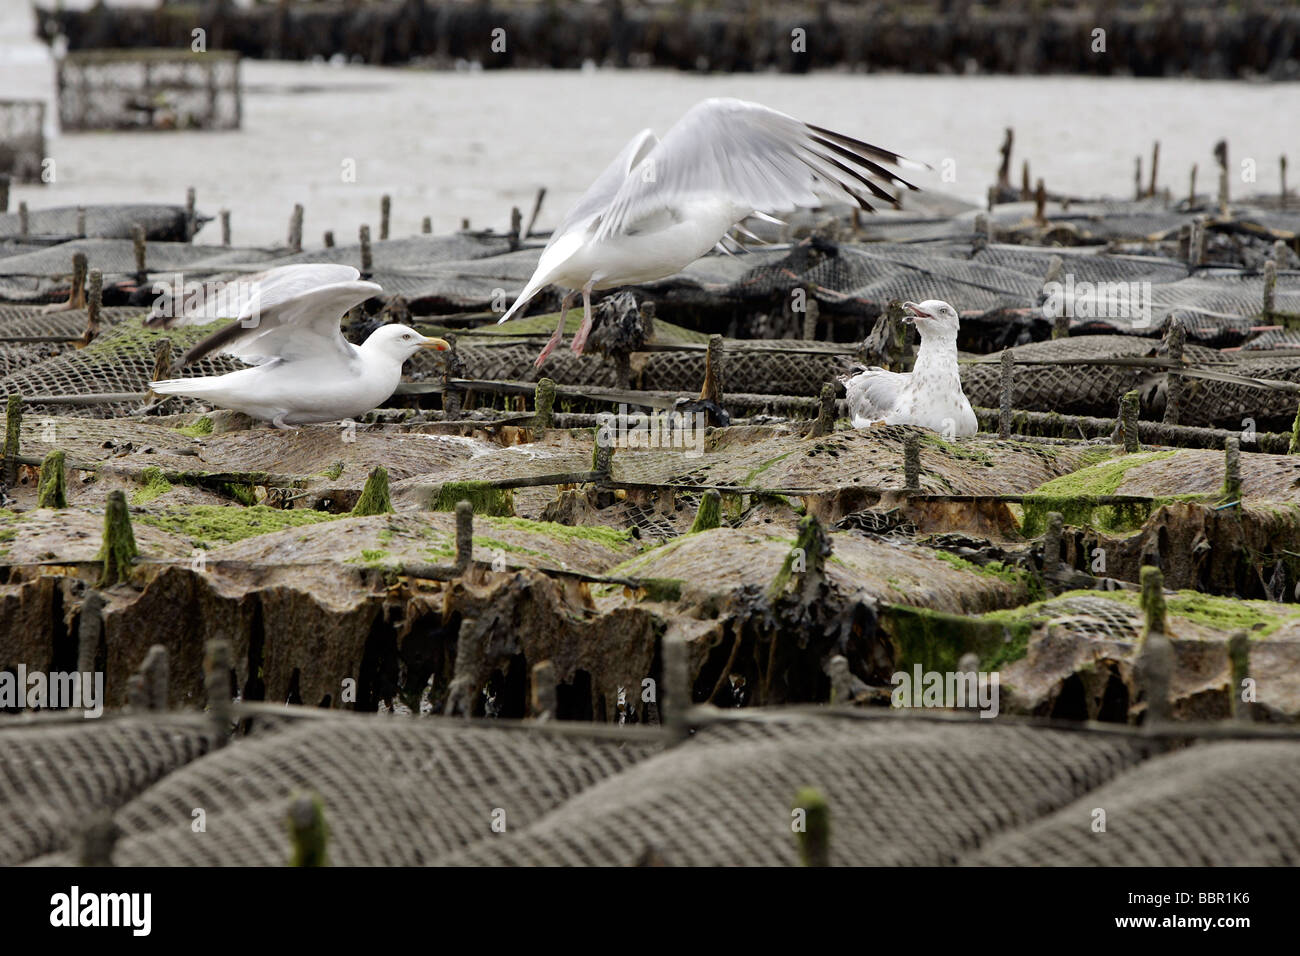 SEAGULLS OVER THE OYSTER BEDS, CANCALE, ILLE-ET-VILAINE (35), FRANCE Stock Photo